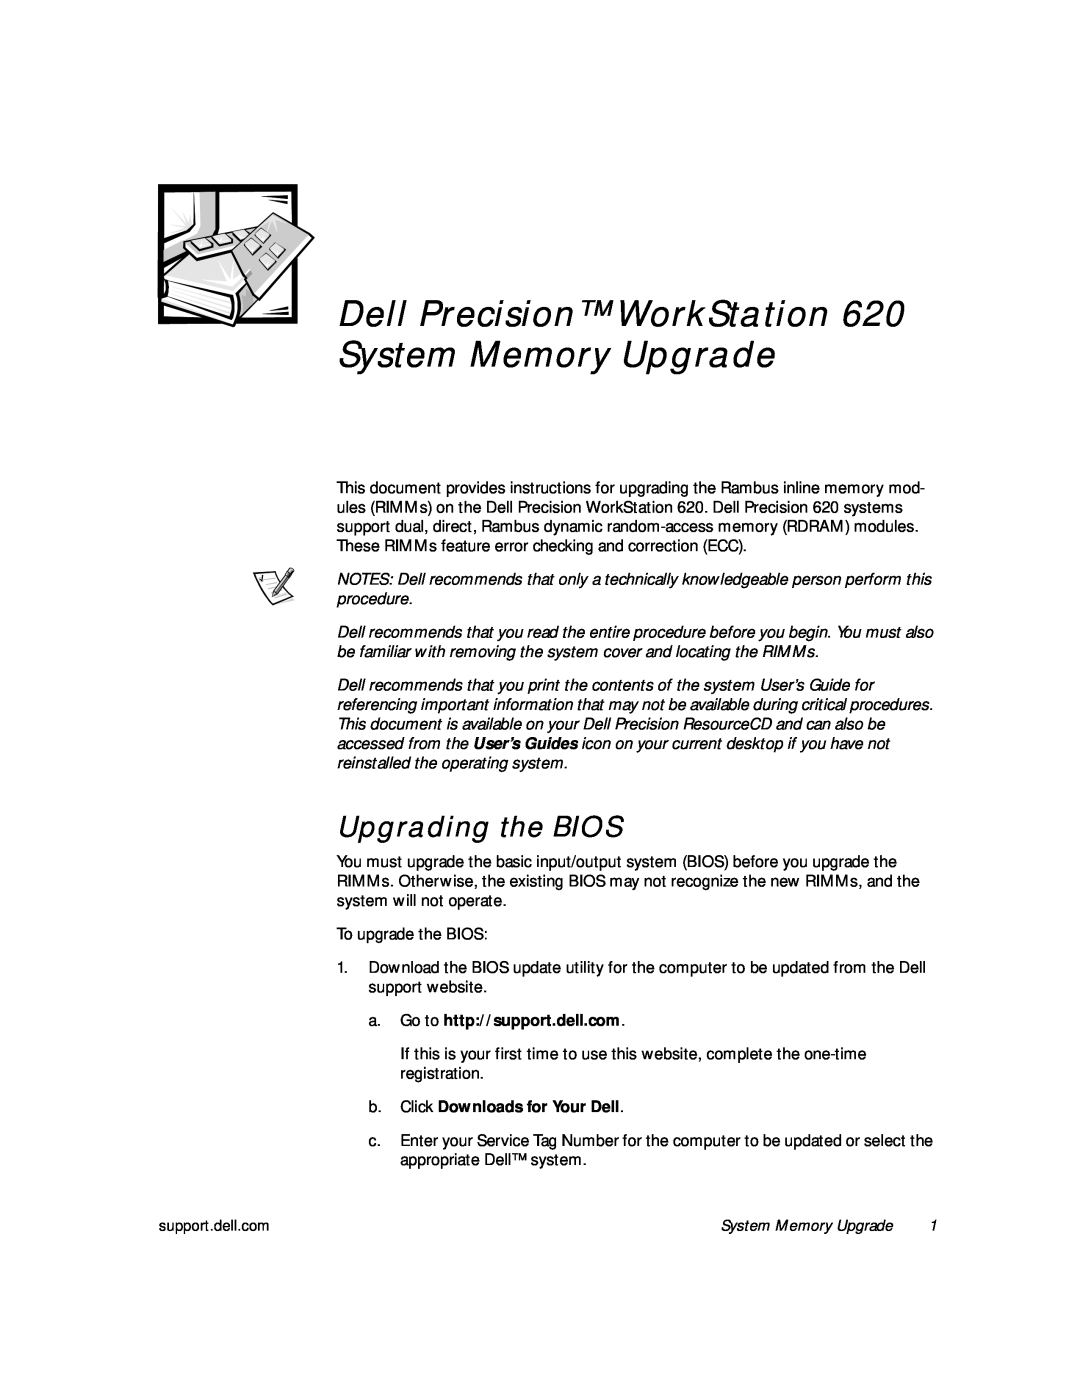 Dell 620 manual Upgrading the BIOS, Dell Precision WorkStation System Memory Upgrade 